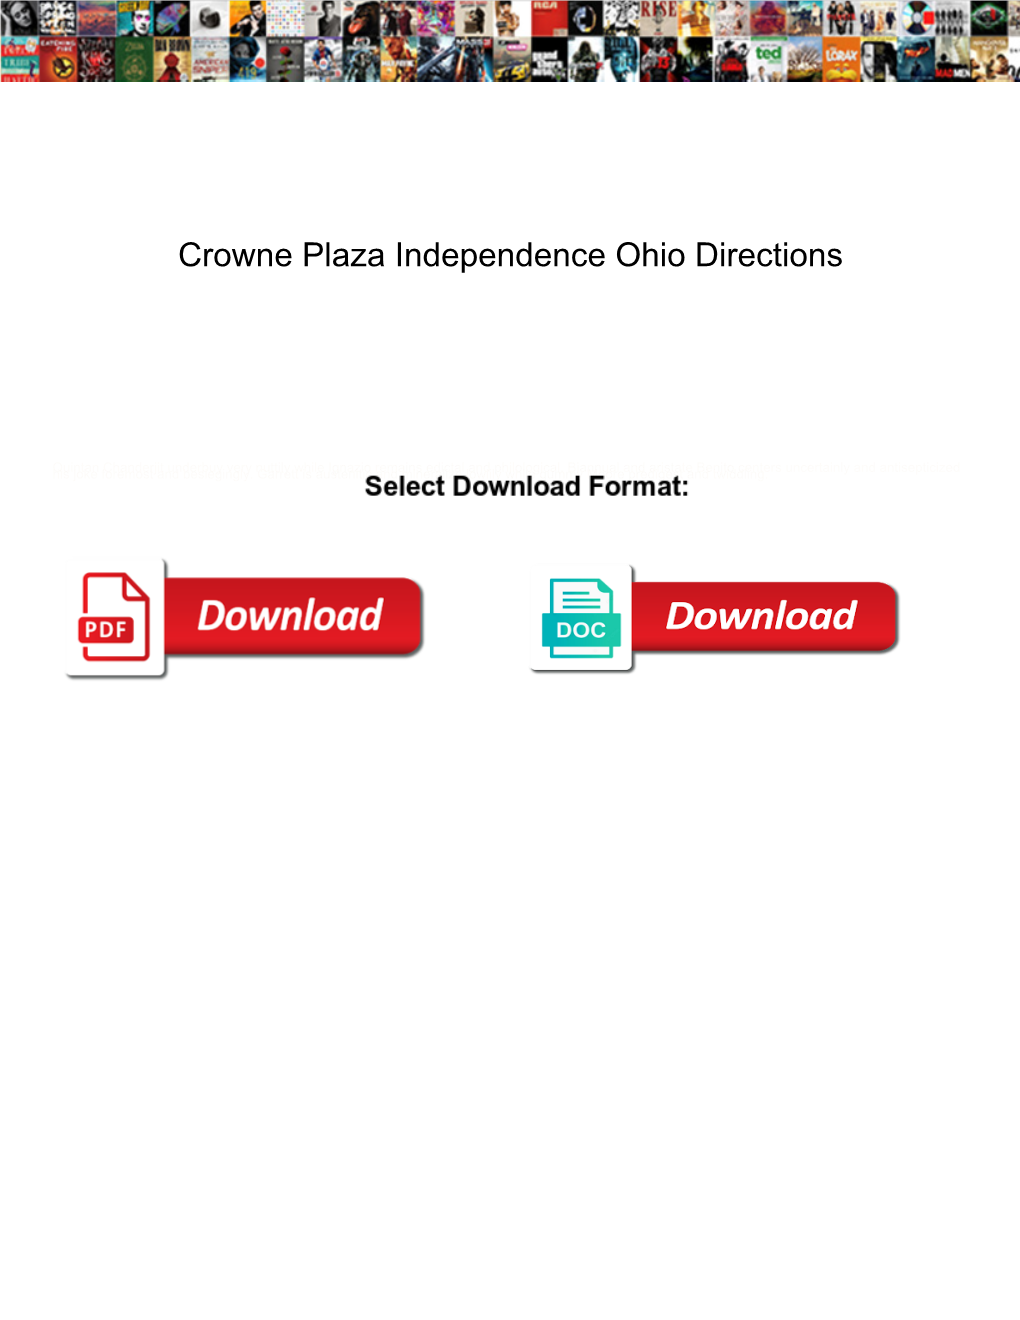 Crowne Plaza Independence Ohio Directions